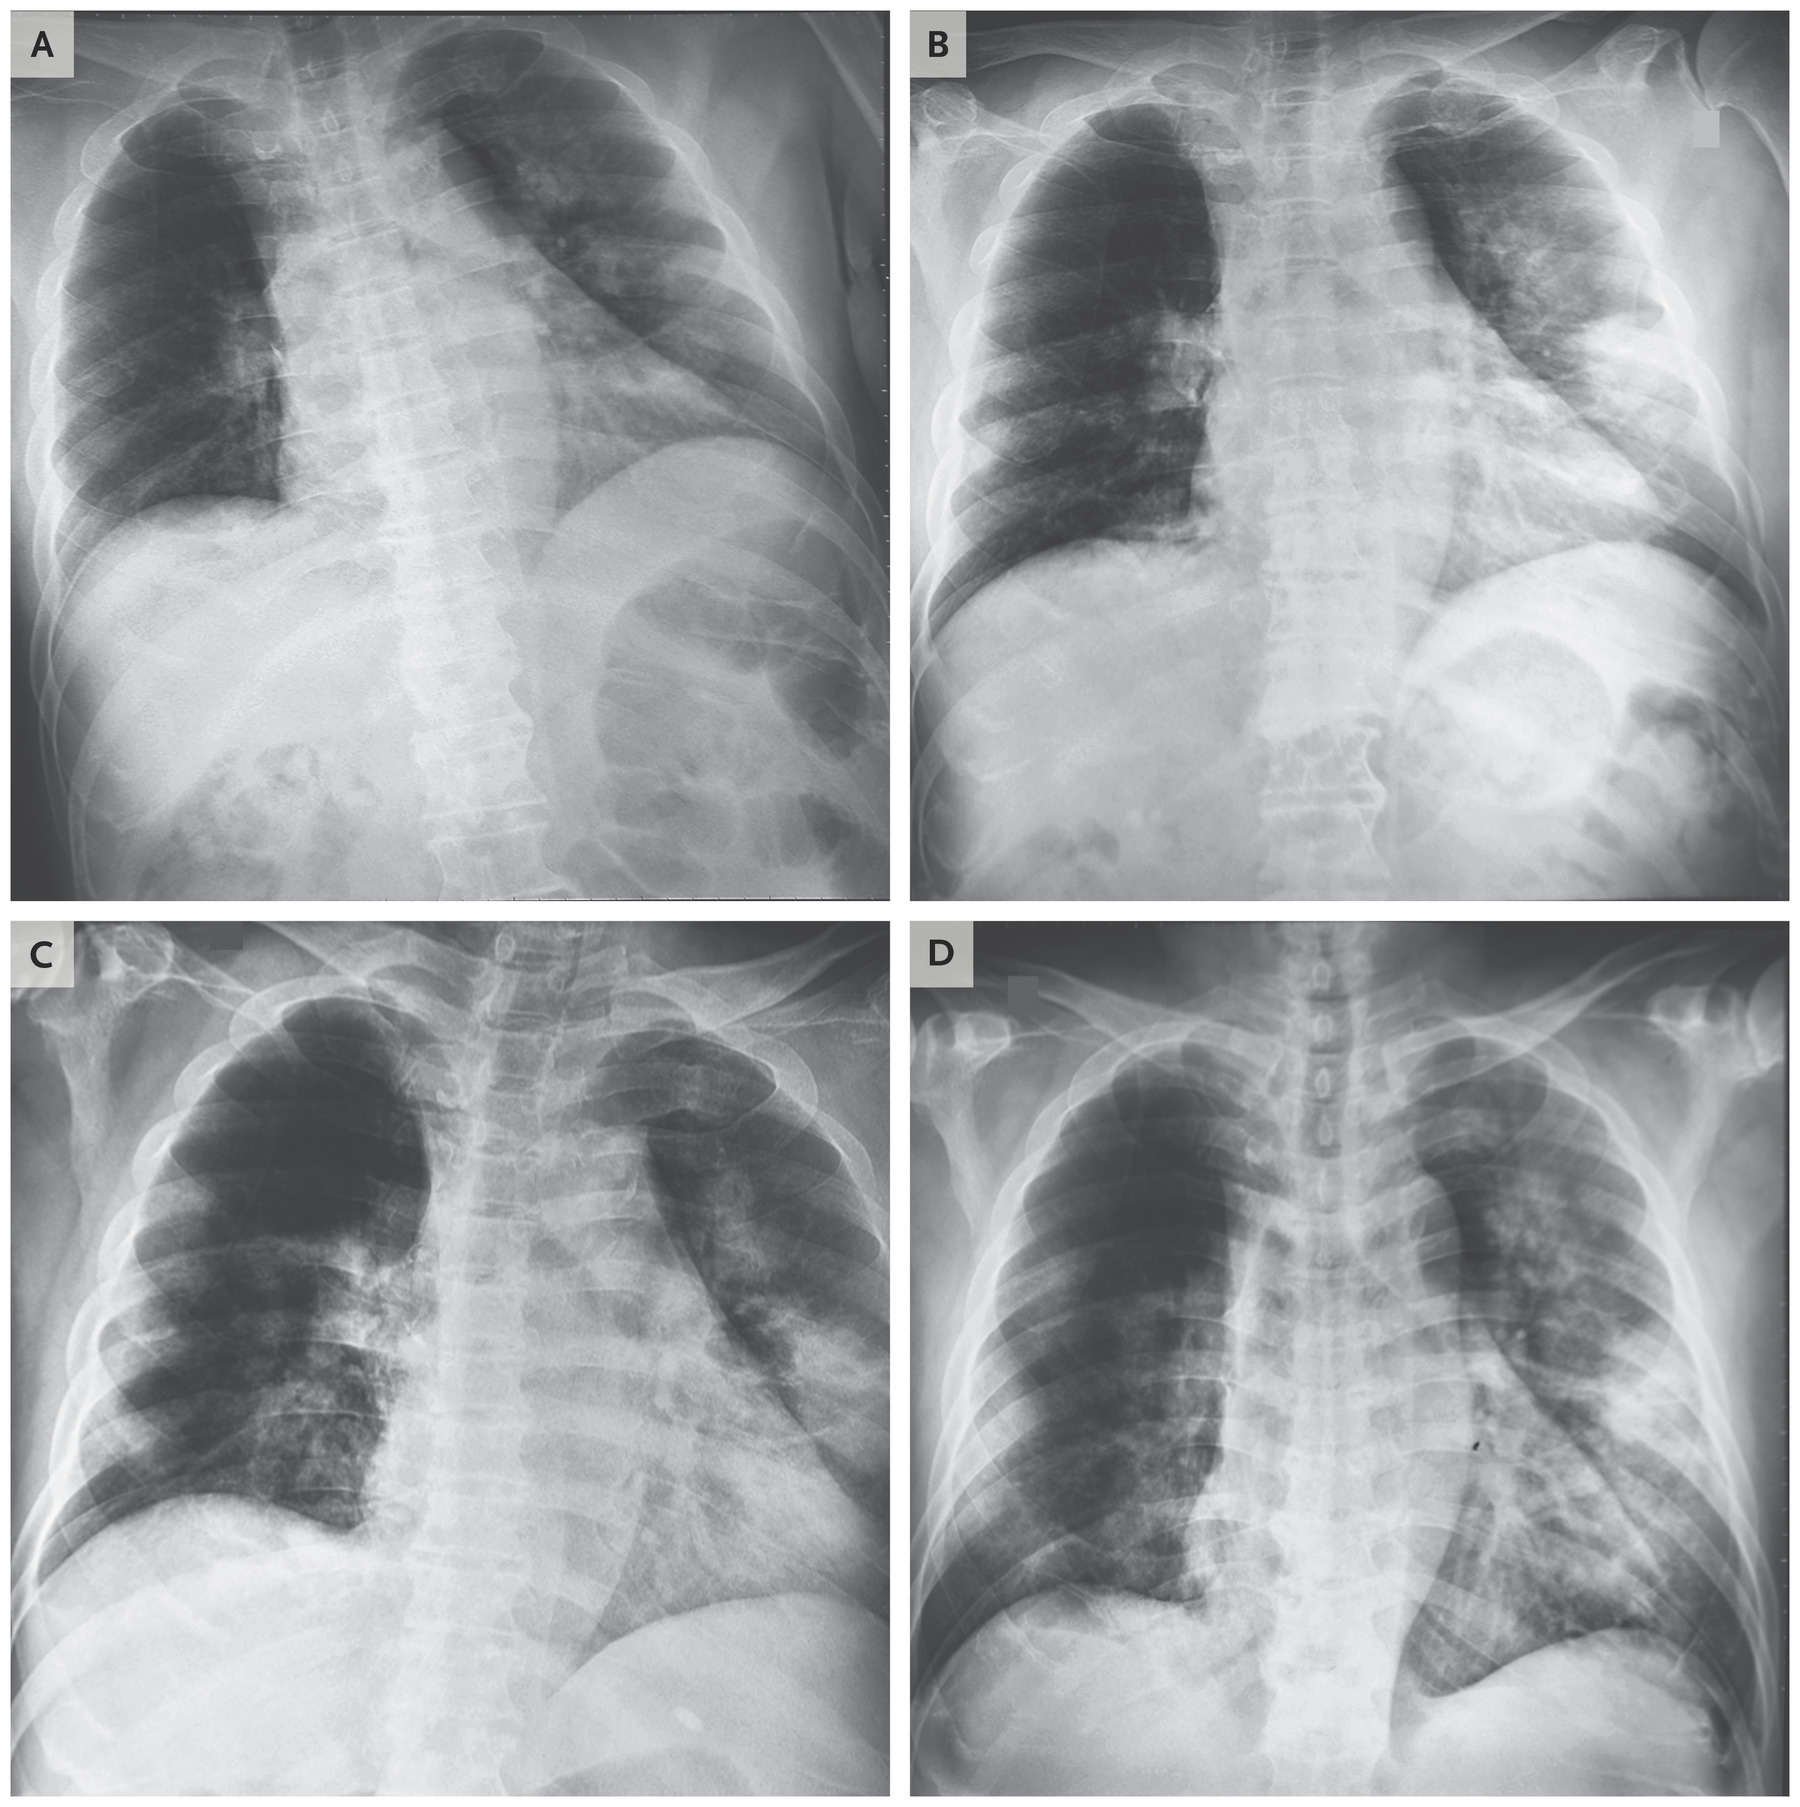 Chest radiographs obtained at admission (A) and on day 3 (B) of man who had traveled to Wuhan